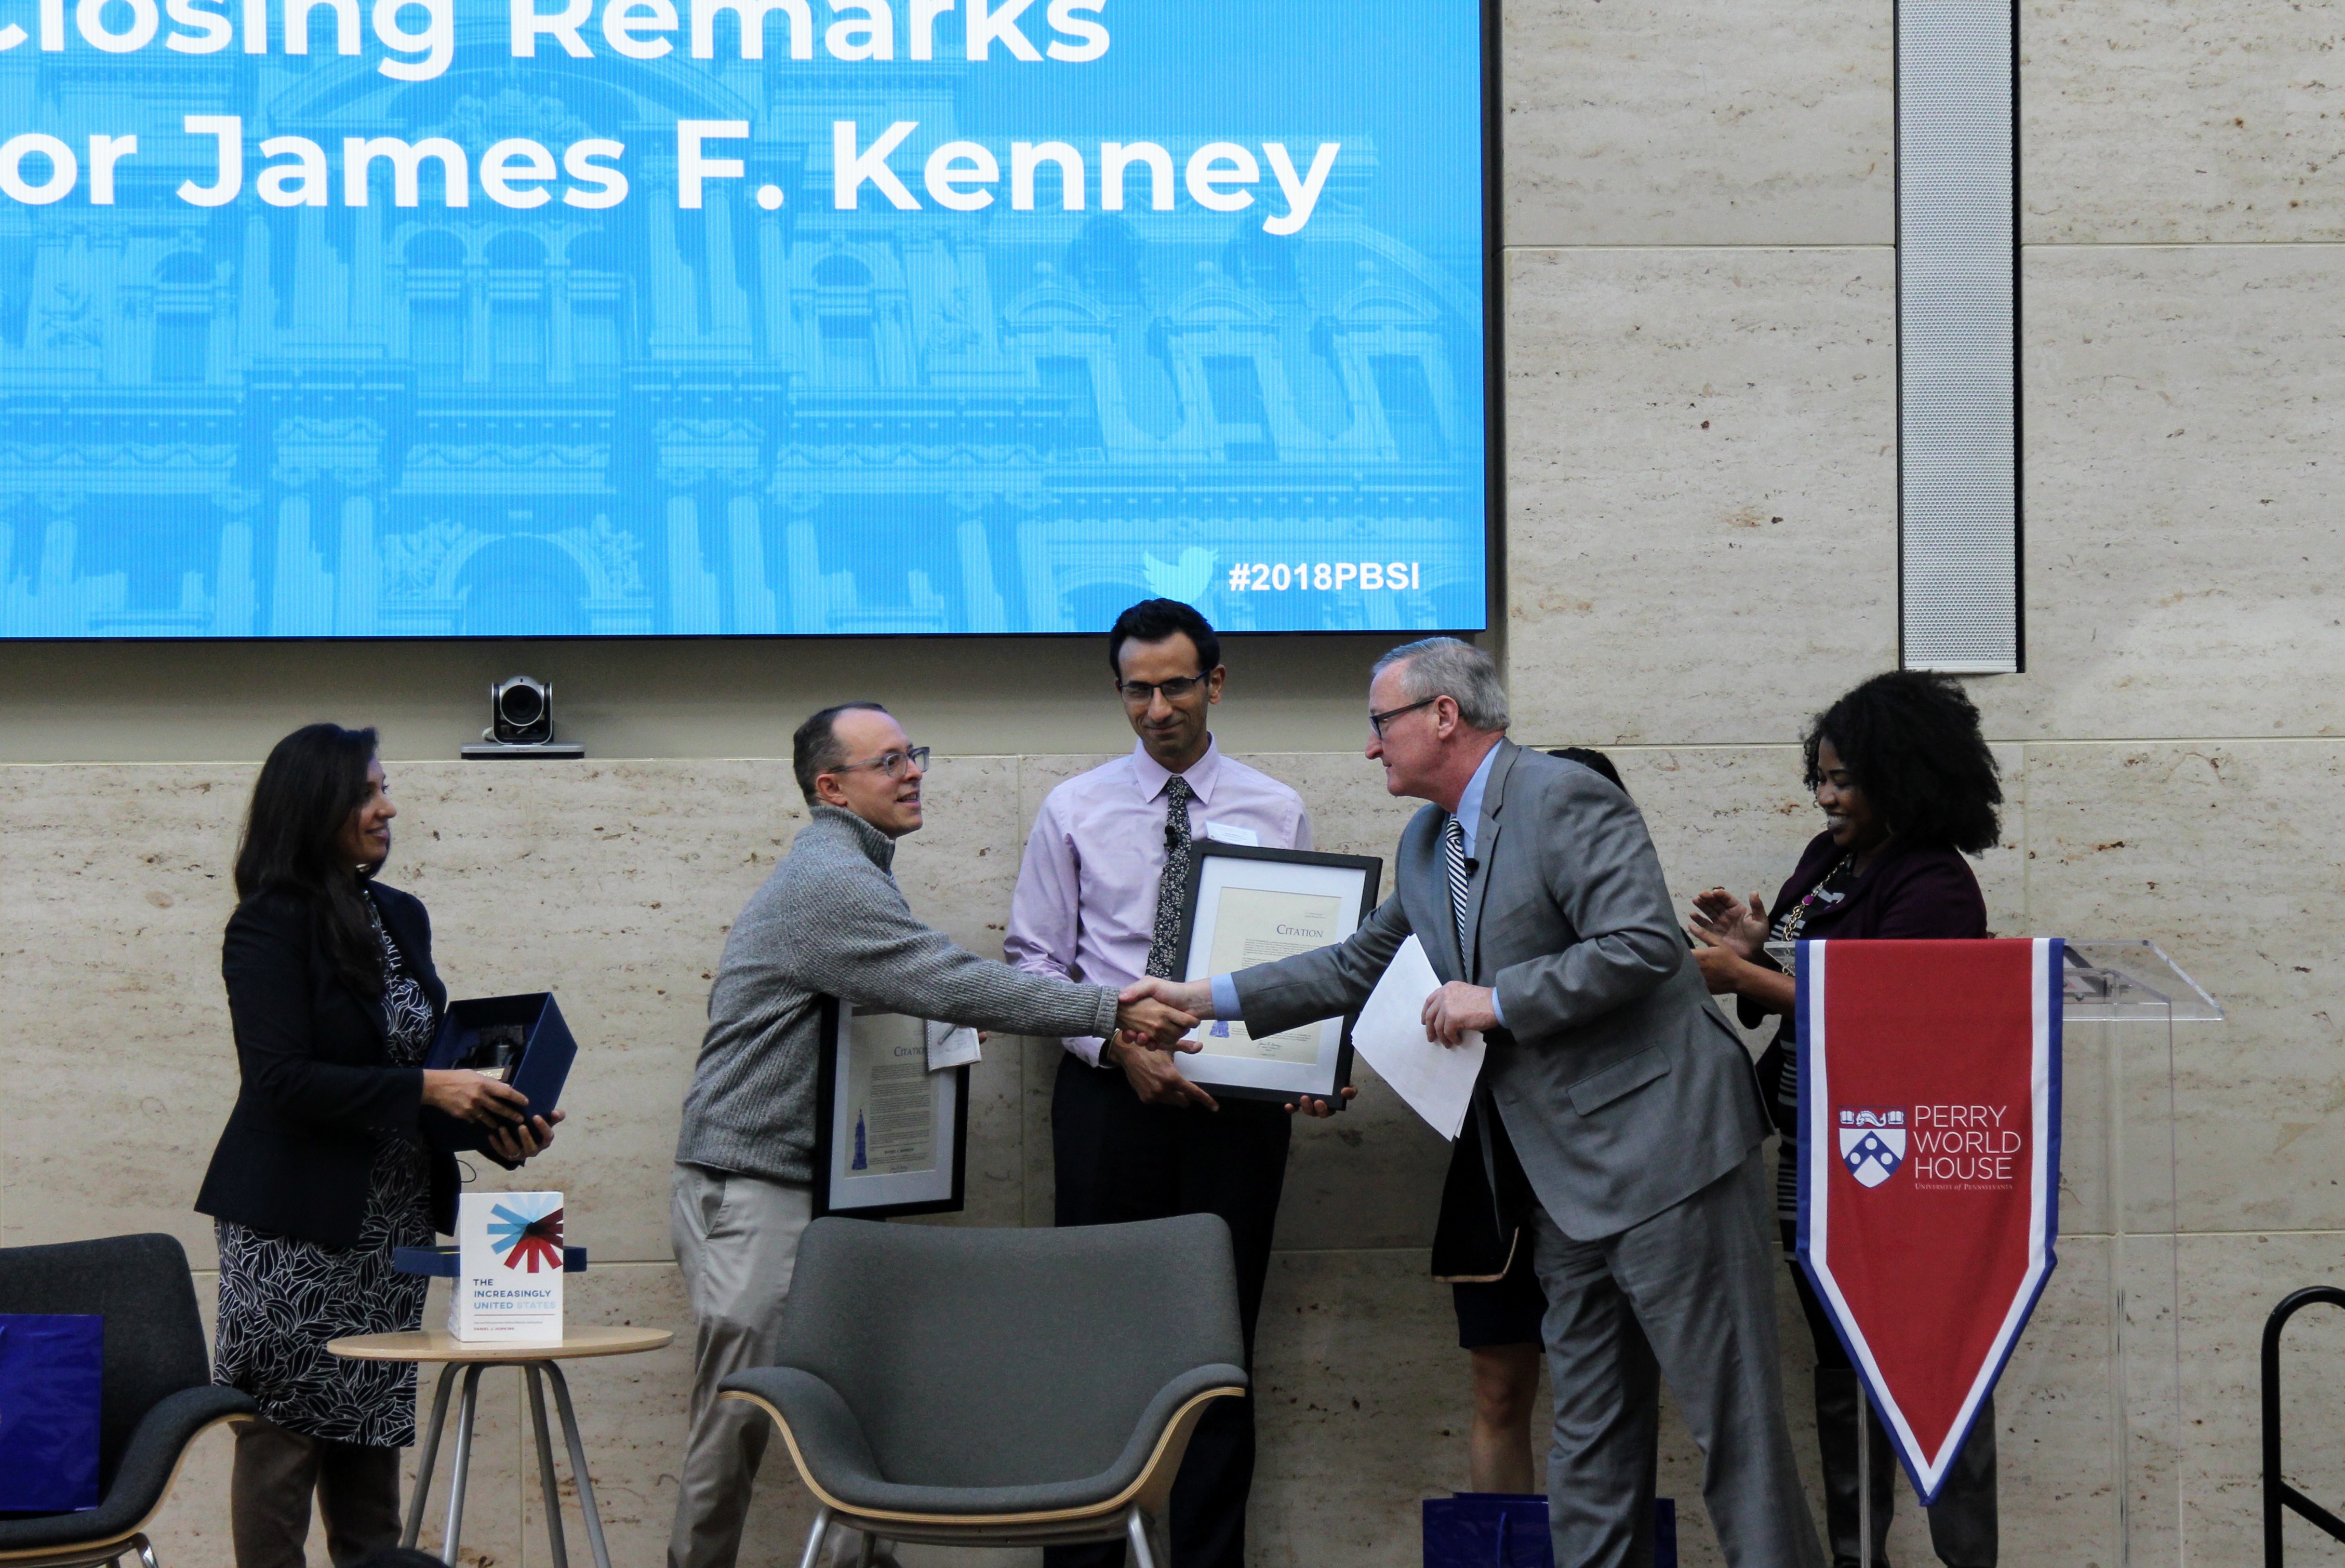 Mayor Kenney shakes hands with Daniel Hopkins on stage at Perry World House